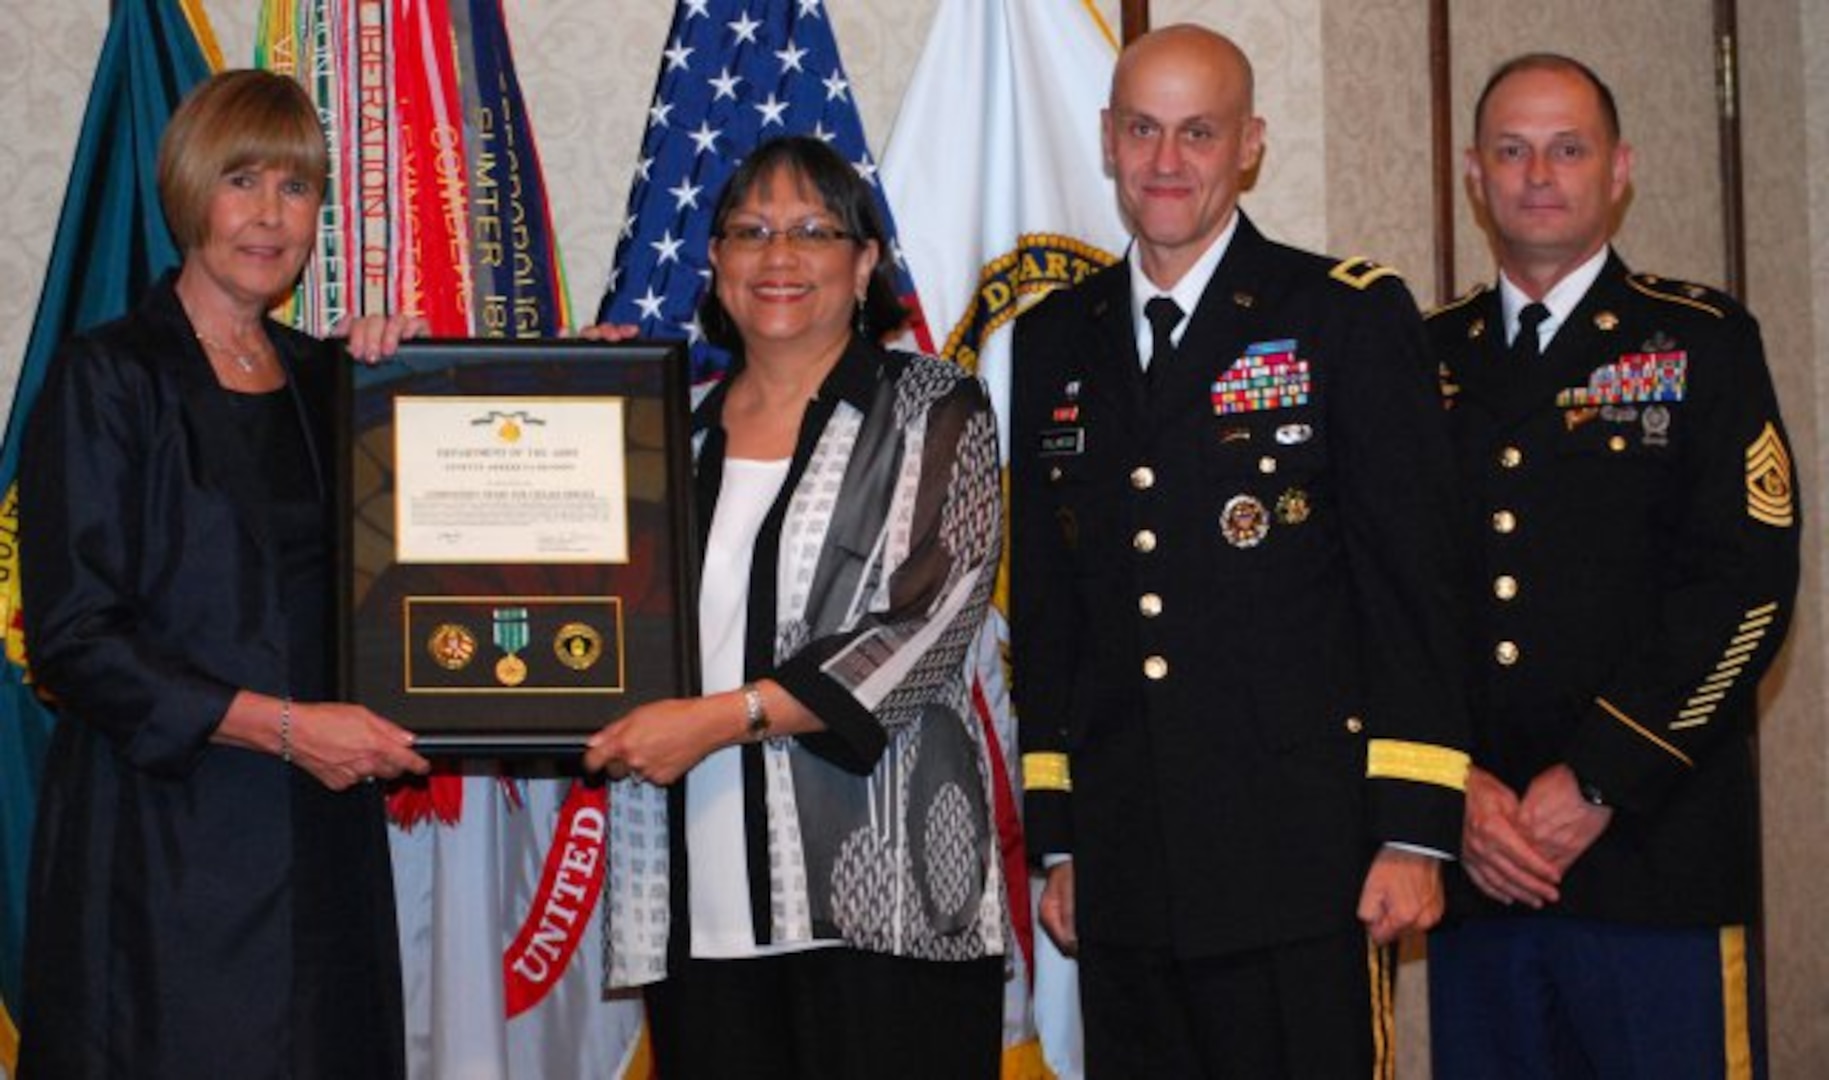 Ann Arkeketa-Rendon is awarded the Commander's Award for Civilian Service from Dr. Carol Lowman during an awards ceremony May 16 at Redstone Arsenal, Ala., after being named the Army Contracting Command's Small Business Specialist of the Year for 2011. Lowman is the deputy to the commanding general at ACC. Also pictured are Brig. Gen. Kirk Vollmecke, the Mission and Installation Contracting Command commanding general, and ACC Command Sgt. Maj. John Murray. (Photo by Larry McCaskill)